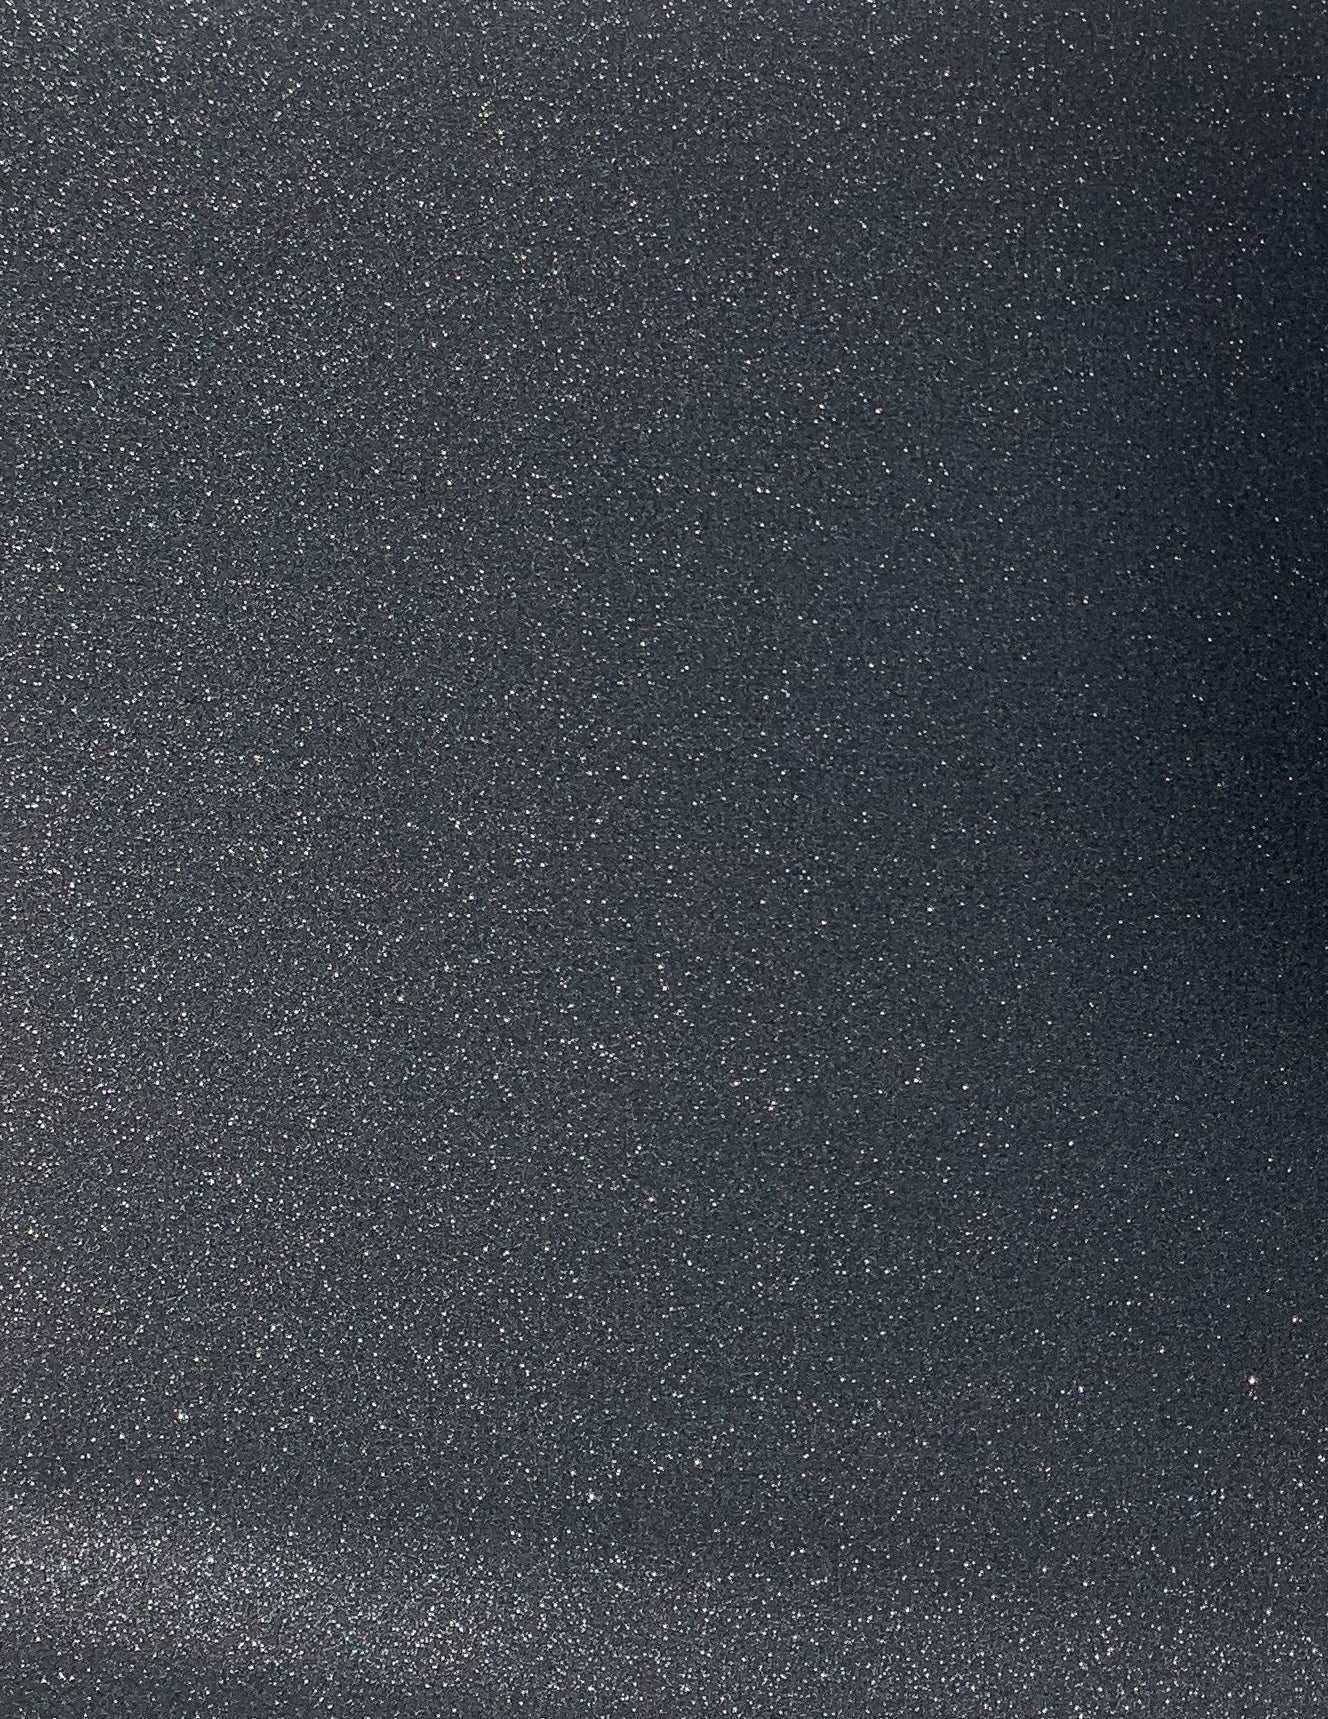 Black Glitter Cardstock - 10 Sheets Premium Glitter Paper - Sized 12 inch x 12 inch - Perfect for Scrapbooking, Crafts, Decorations, Weddings